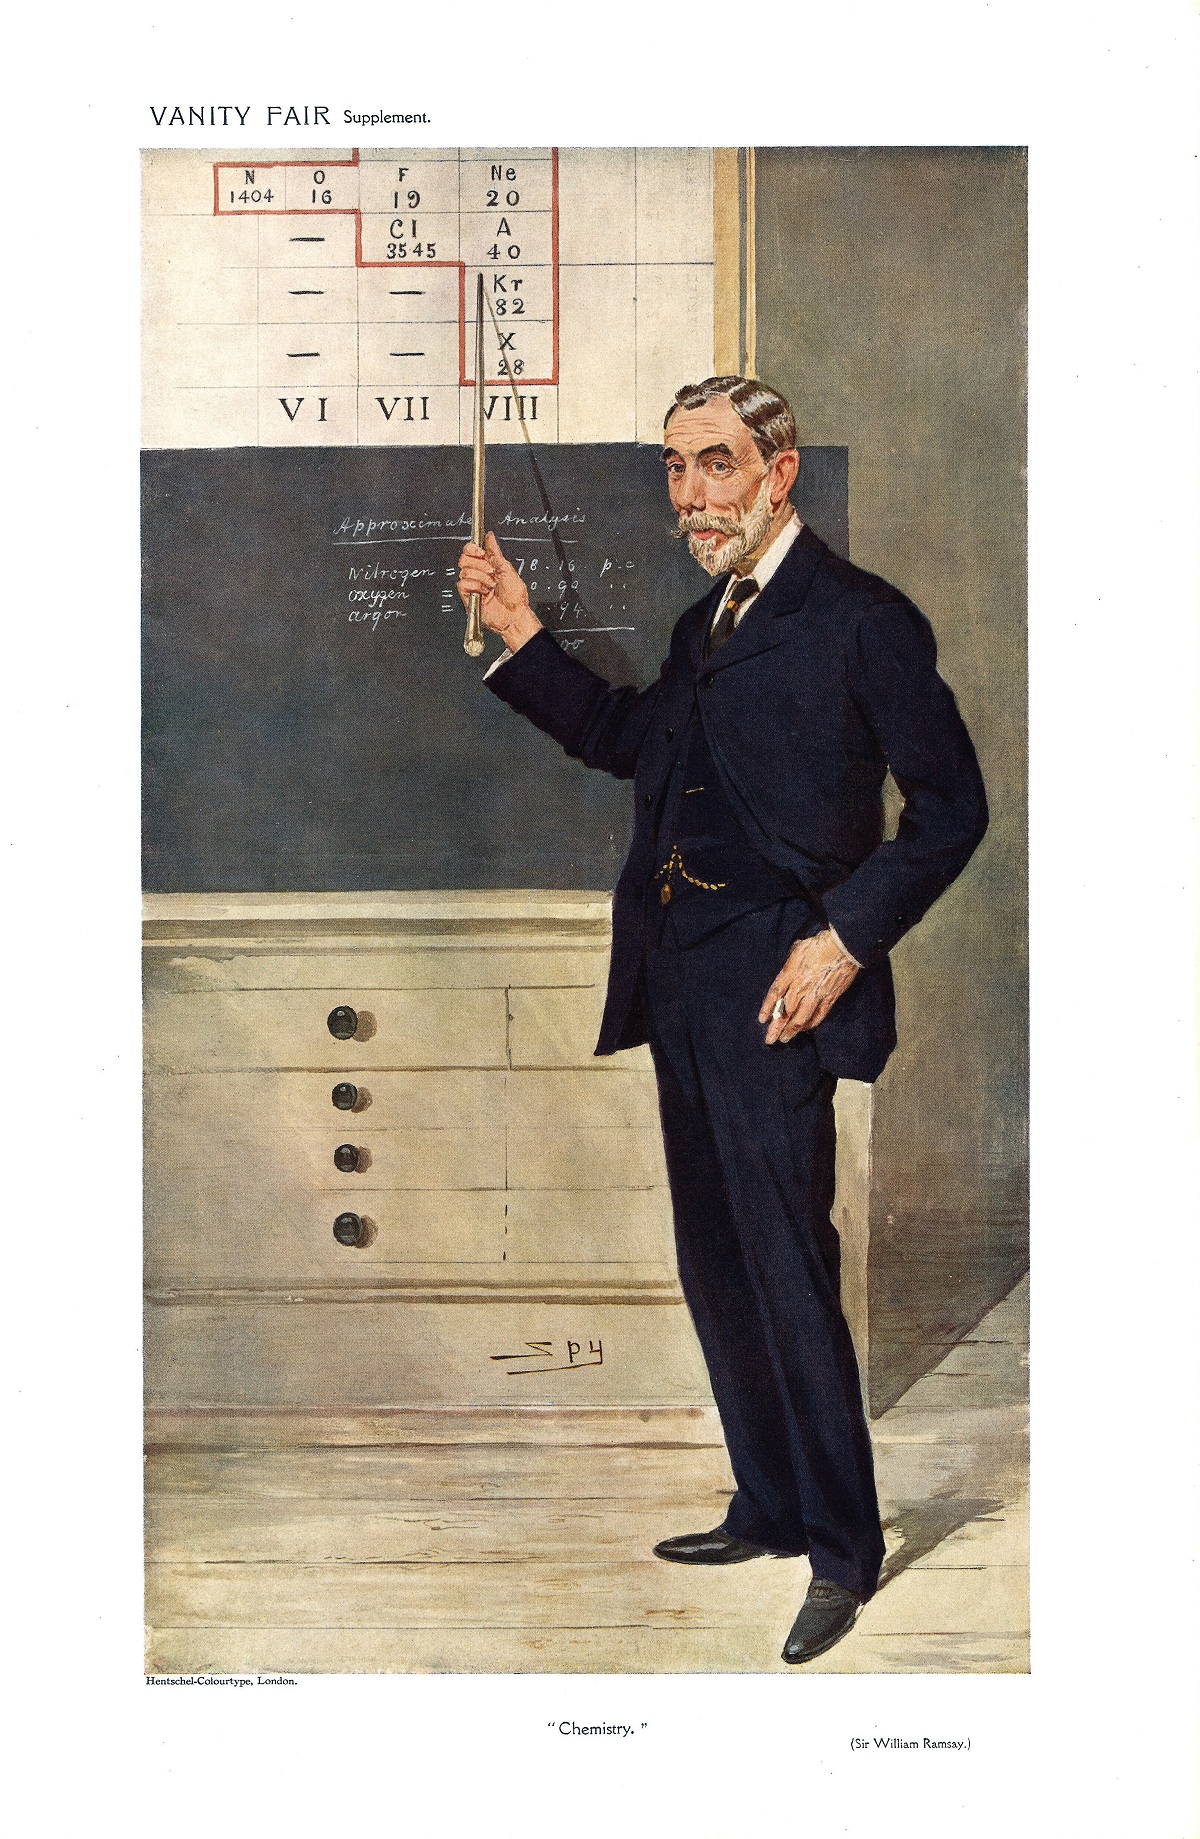 Chemistry 2/12/1908 , Subject Sir William Ramsey , Vanity Fair print, These prints were issued by